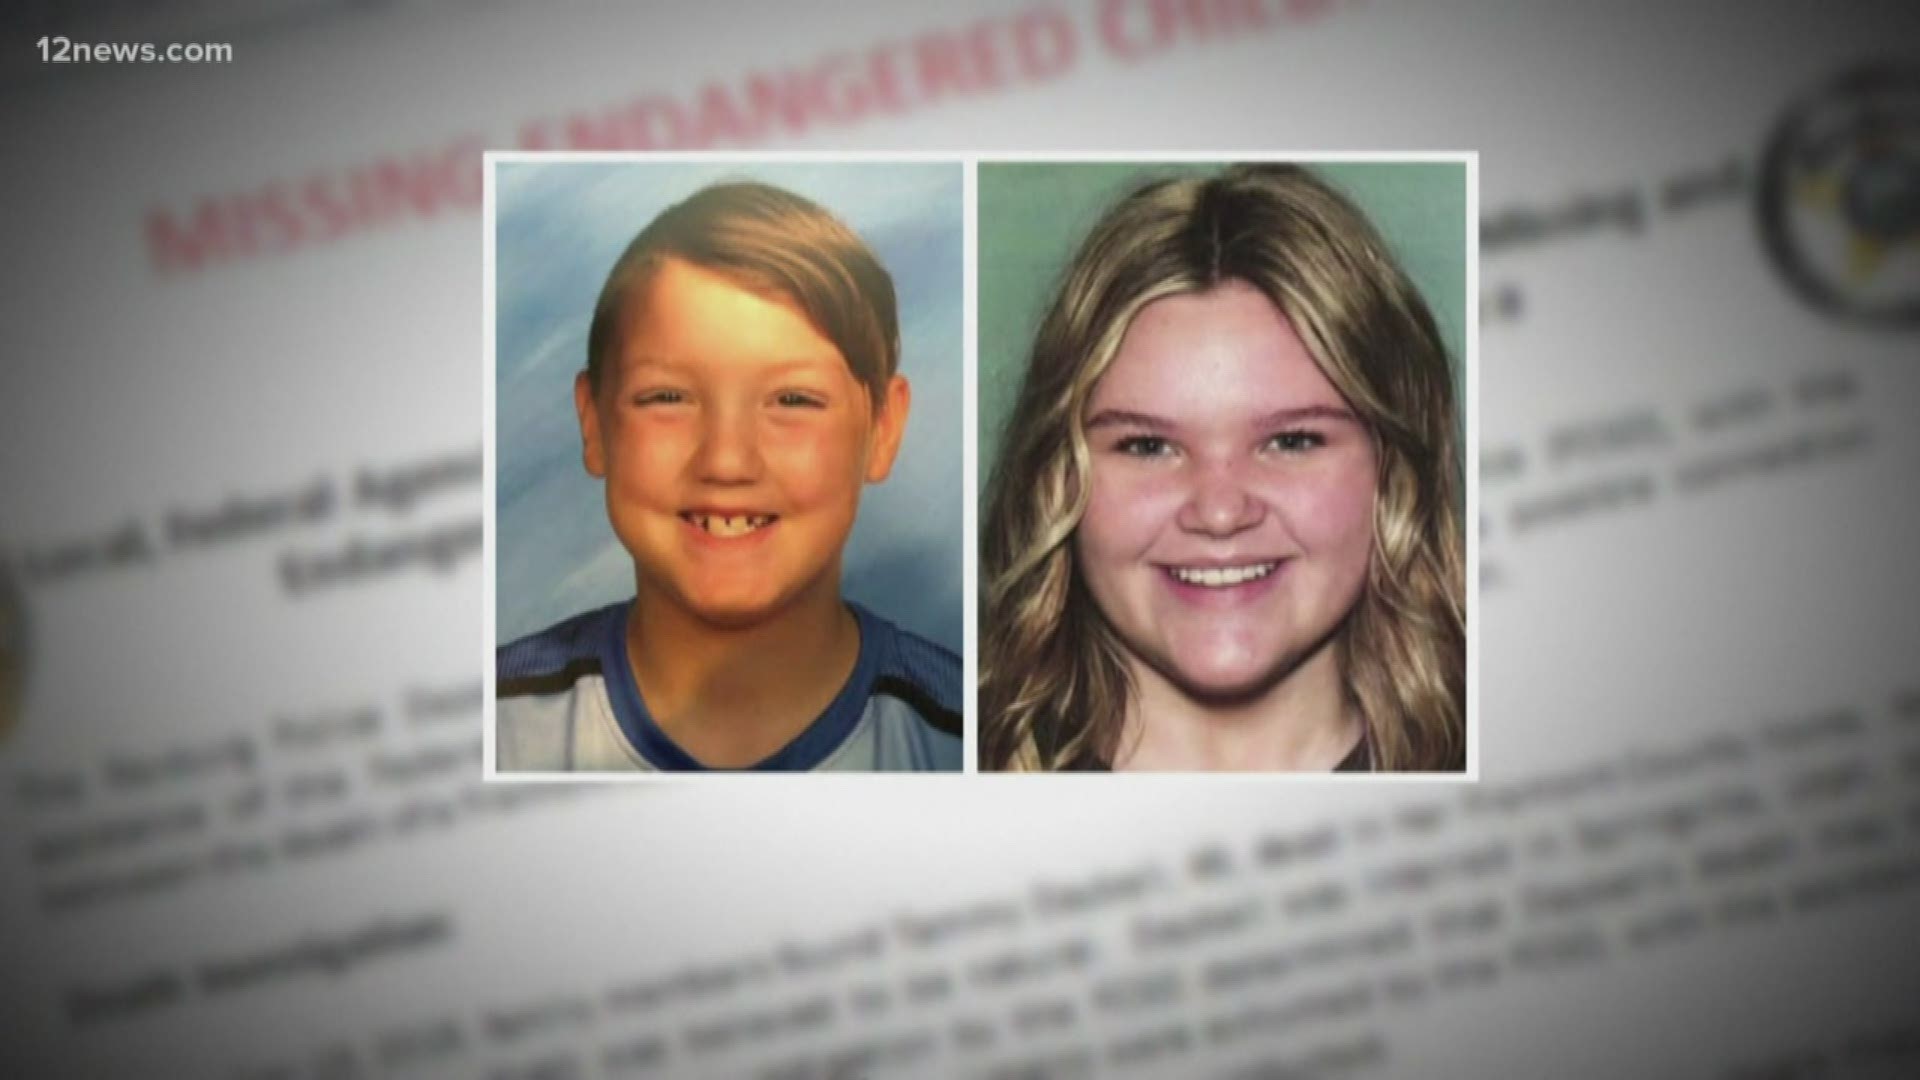 Joshua Vallow, who goes by "JJ," and his adopted sister Tylee Ryan were last seen in Idaho on Sept. 23. Team 12's Nicole Zymek has the latest.